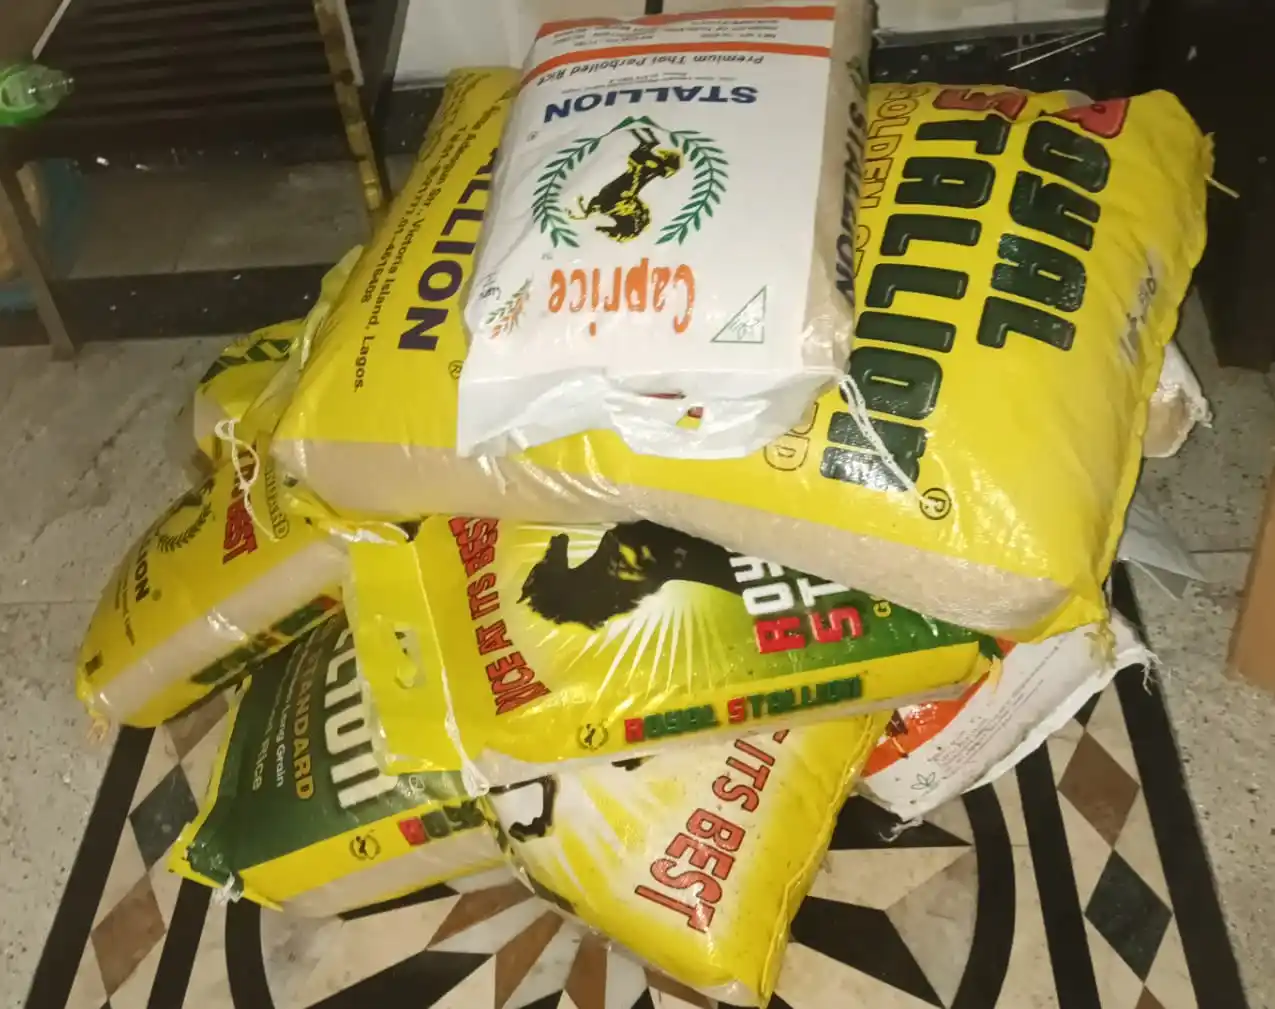 fccpc-raids-supermarkets-in-port-harcourt-seize-underweight-and-re-bagged-rice/